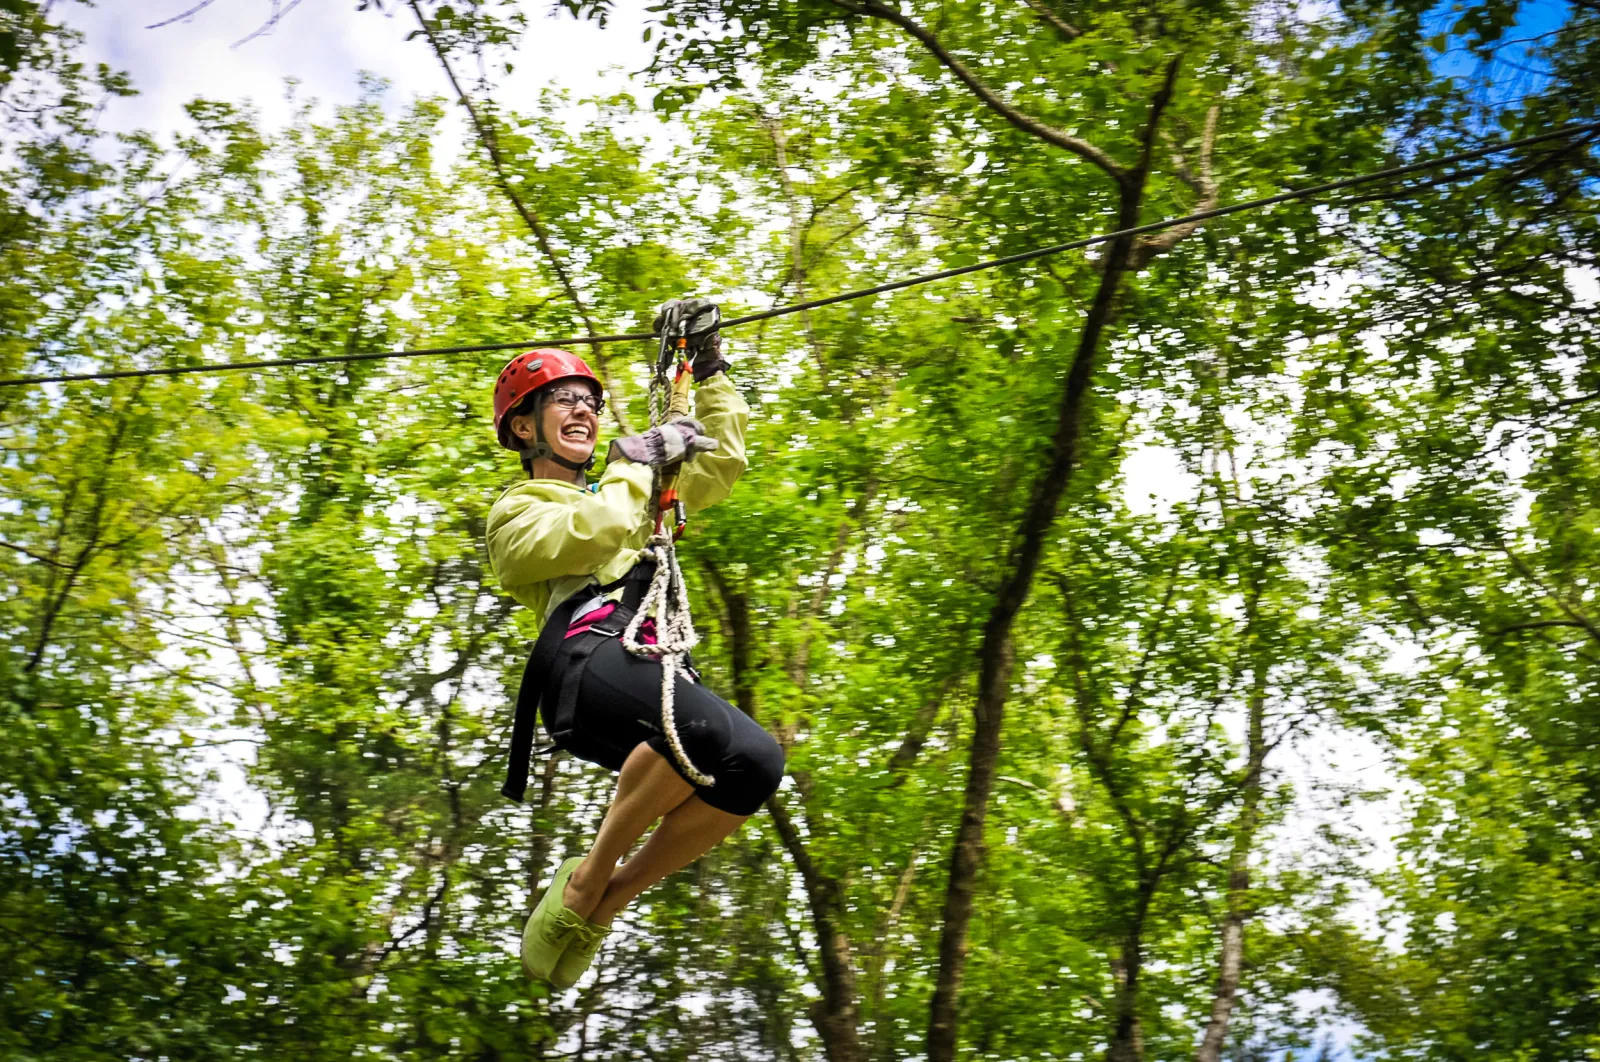 A woman having a thrilling experience in the Canaan Zipline Canopy Tour